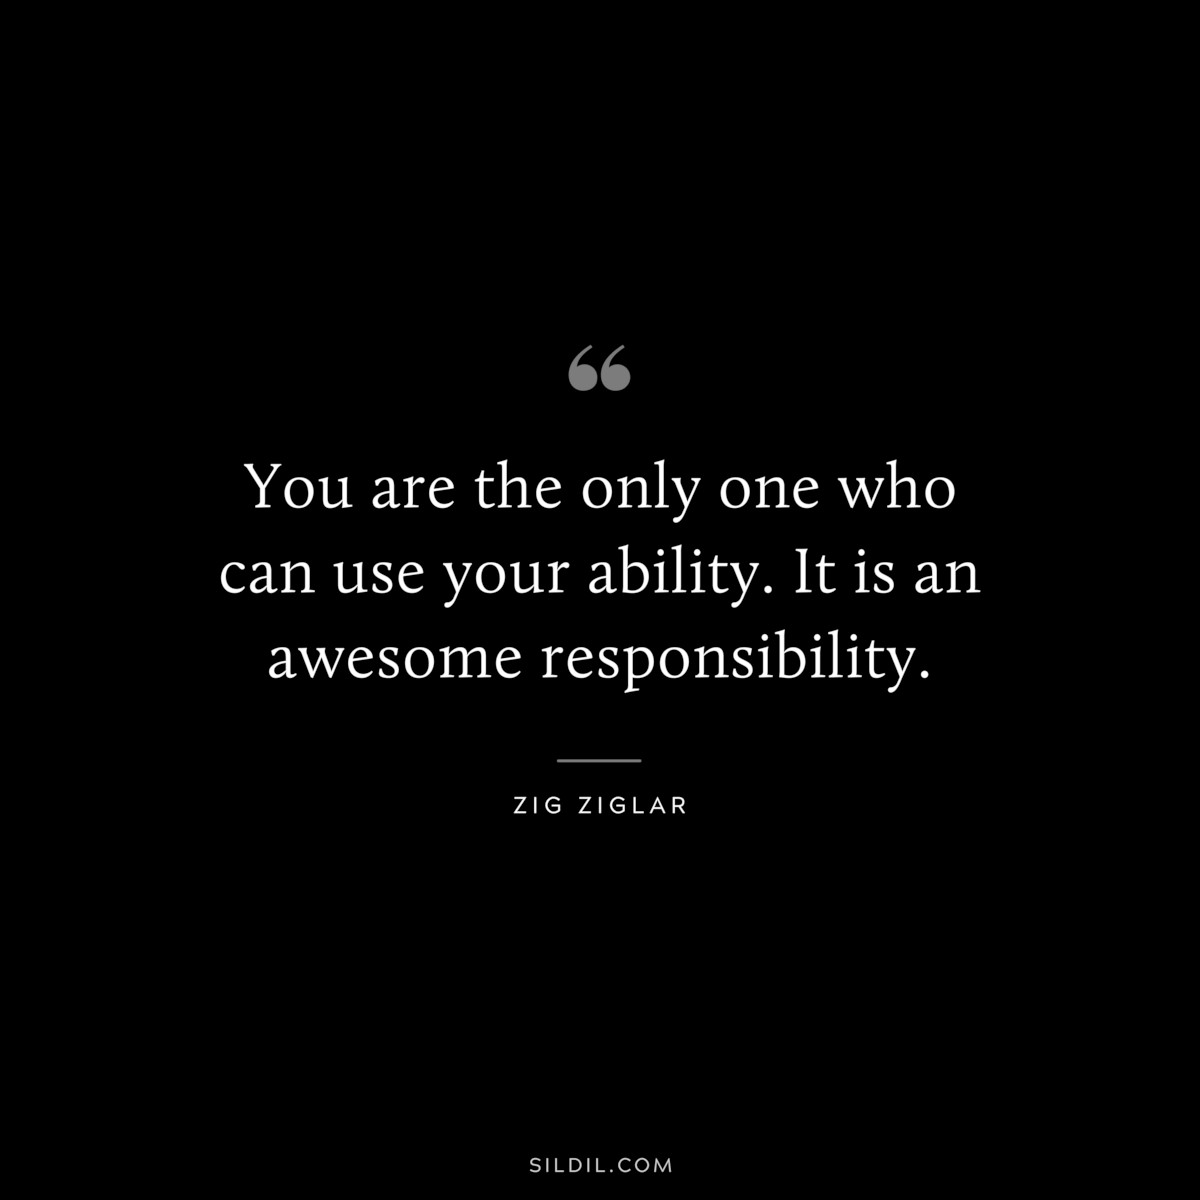 You are the only one who can use your ability. It is an awesome responsibility. ― Zig Ziglar